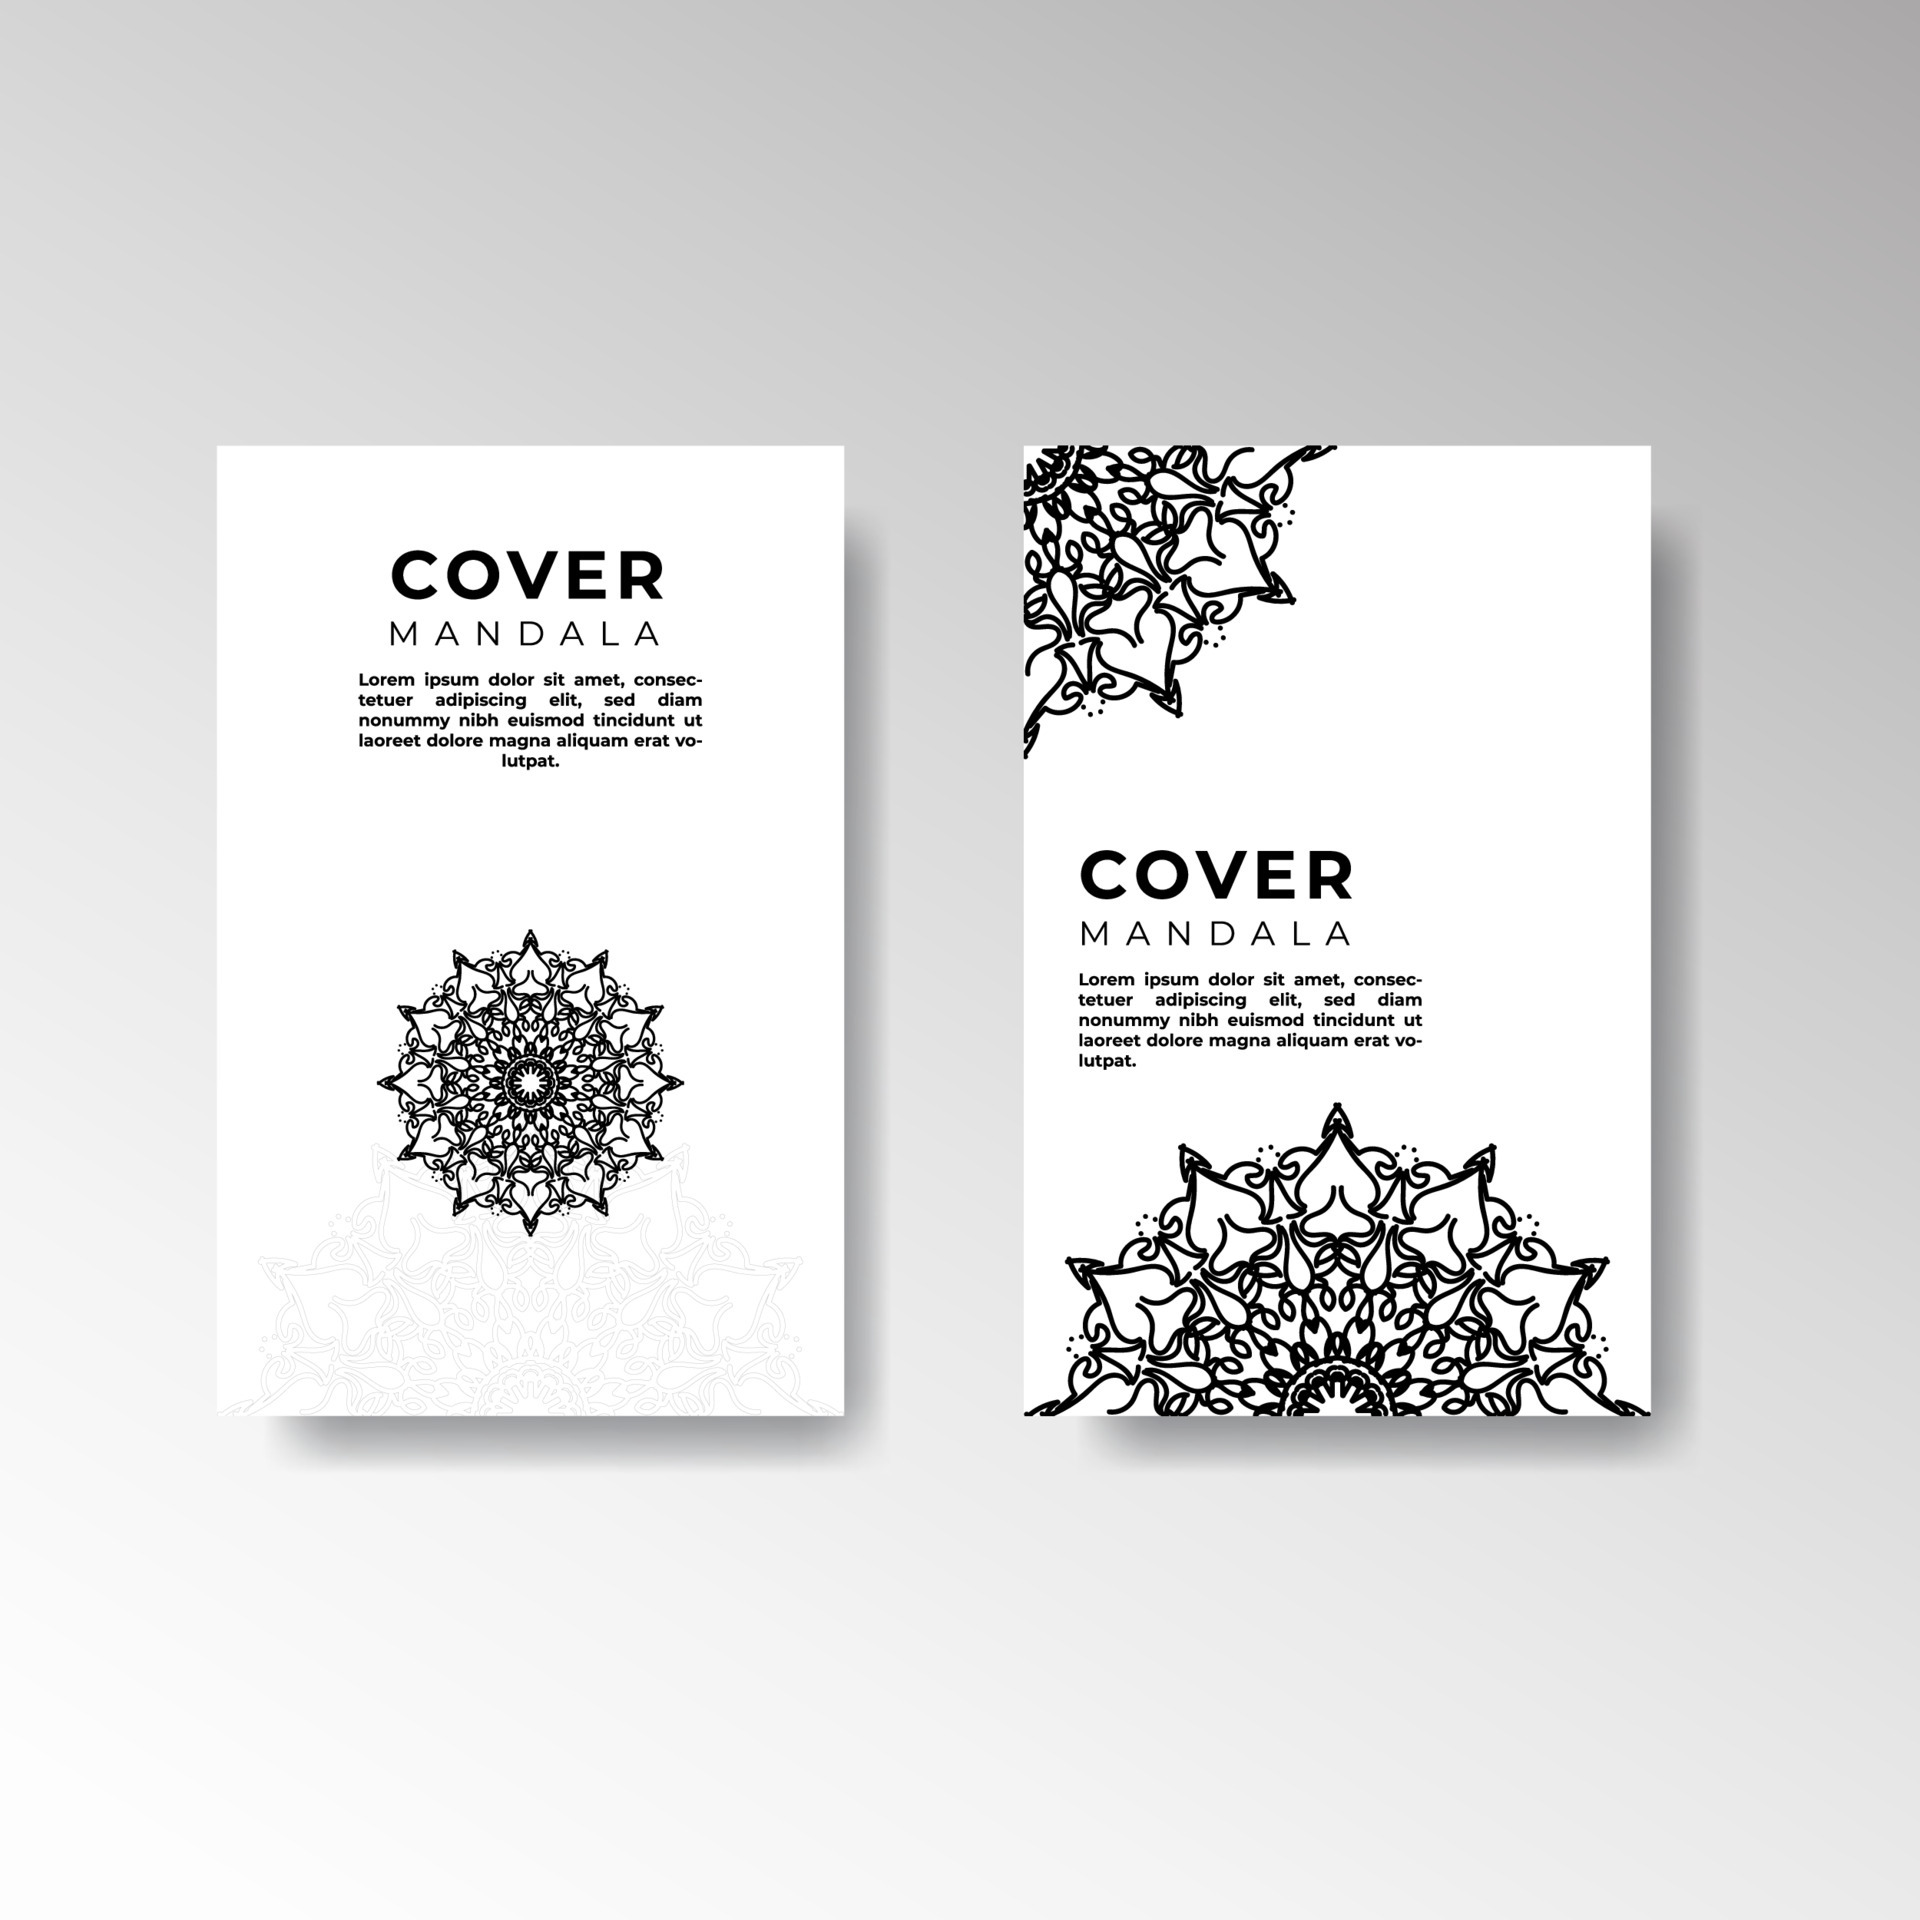 template brochure pages ornament vector illustration. traditional